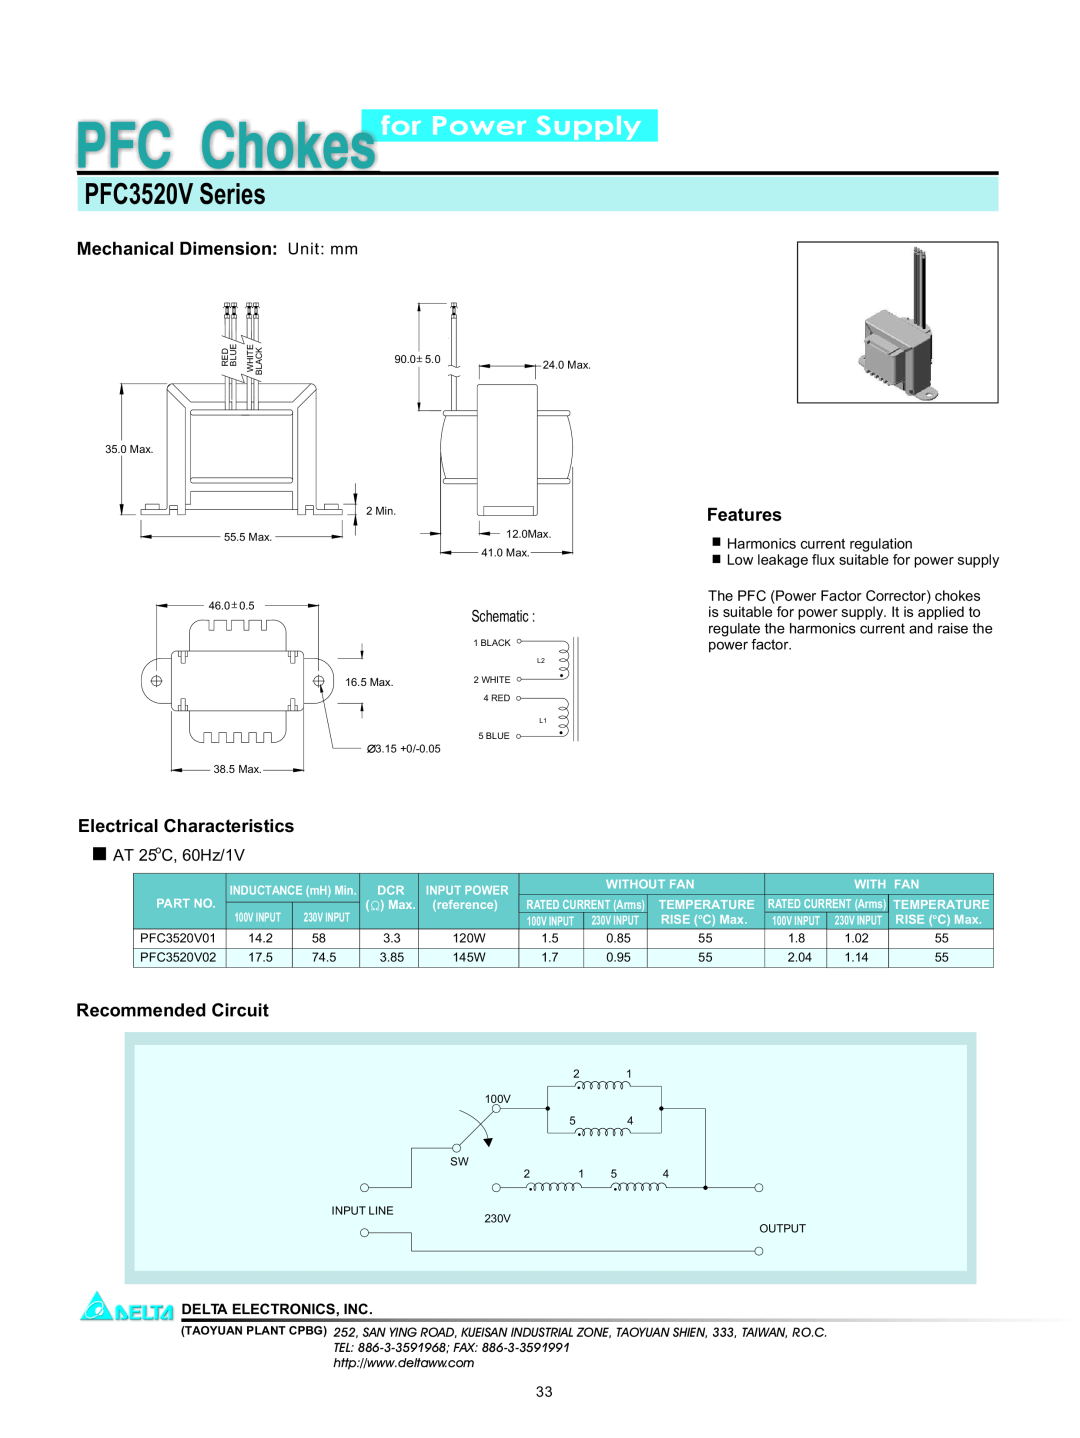 Delta Electronics PFC3520V Series manual for Power Supply, Mechanical Dimension Unit mm, Features, Recommended Circuit 